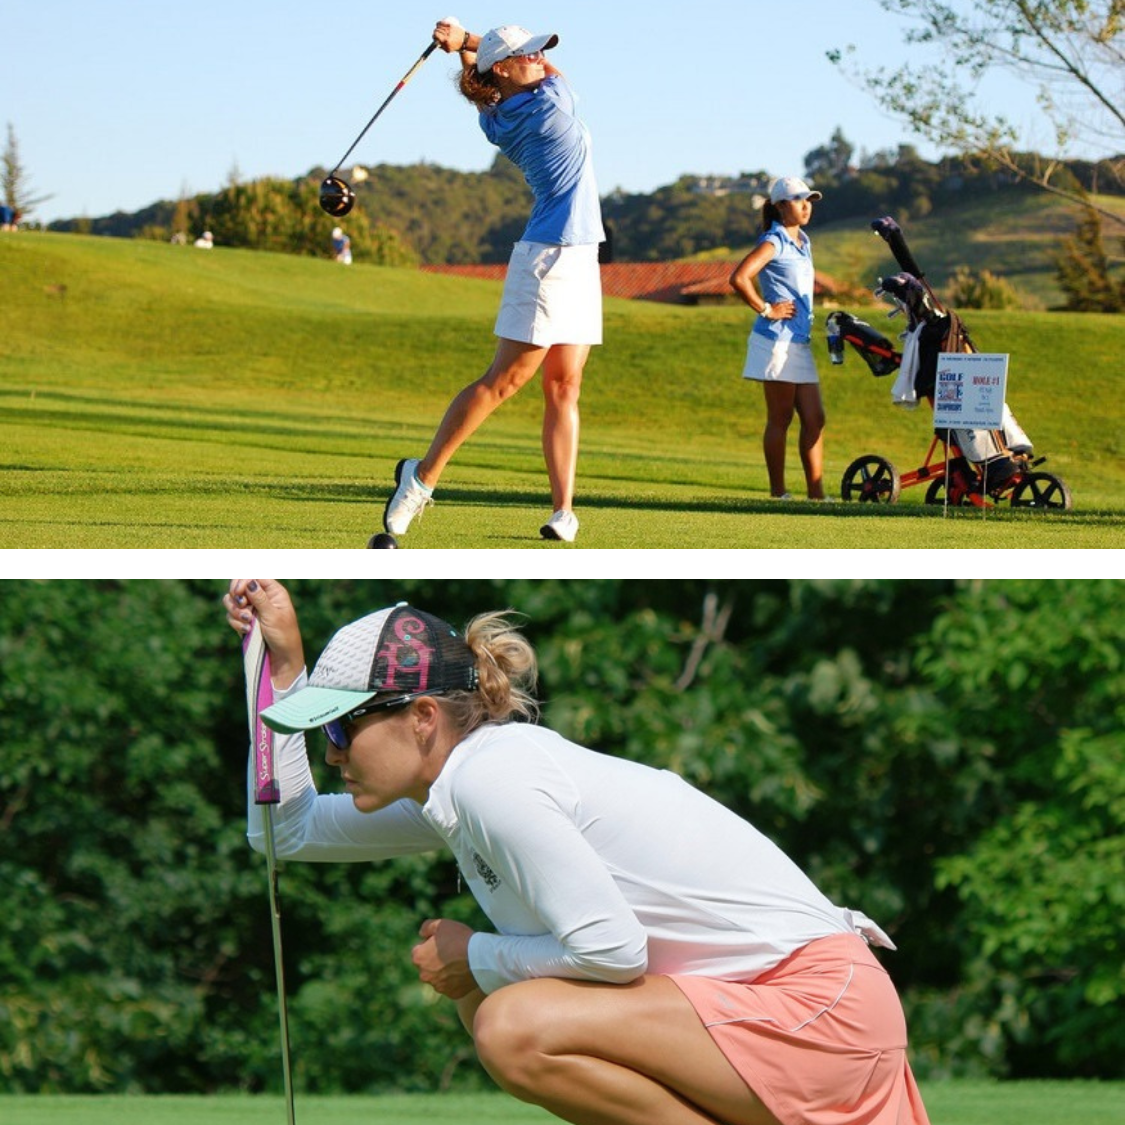 This is a photo collage of two photographs. The first shows a women swinging a club on the fairway. The second shows a women eyeing her shot on the putting green. 